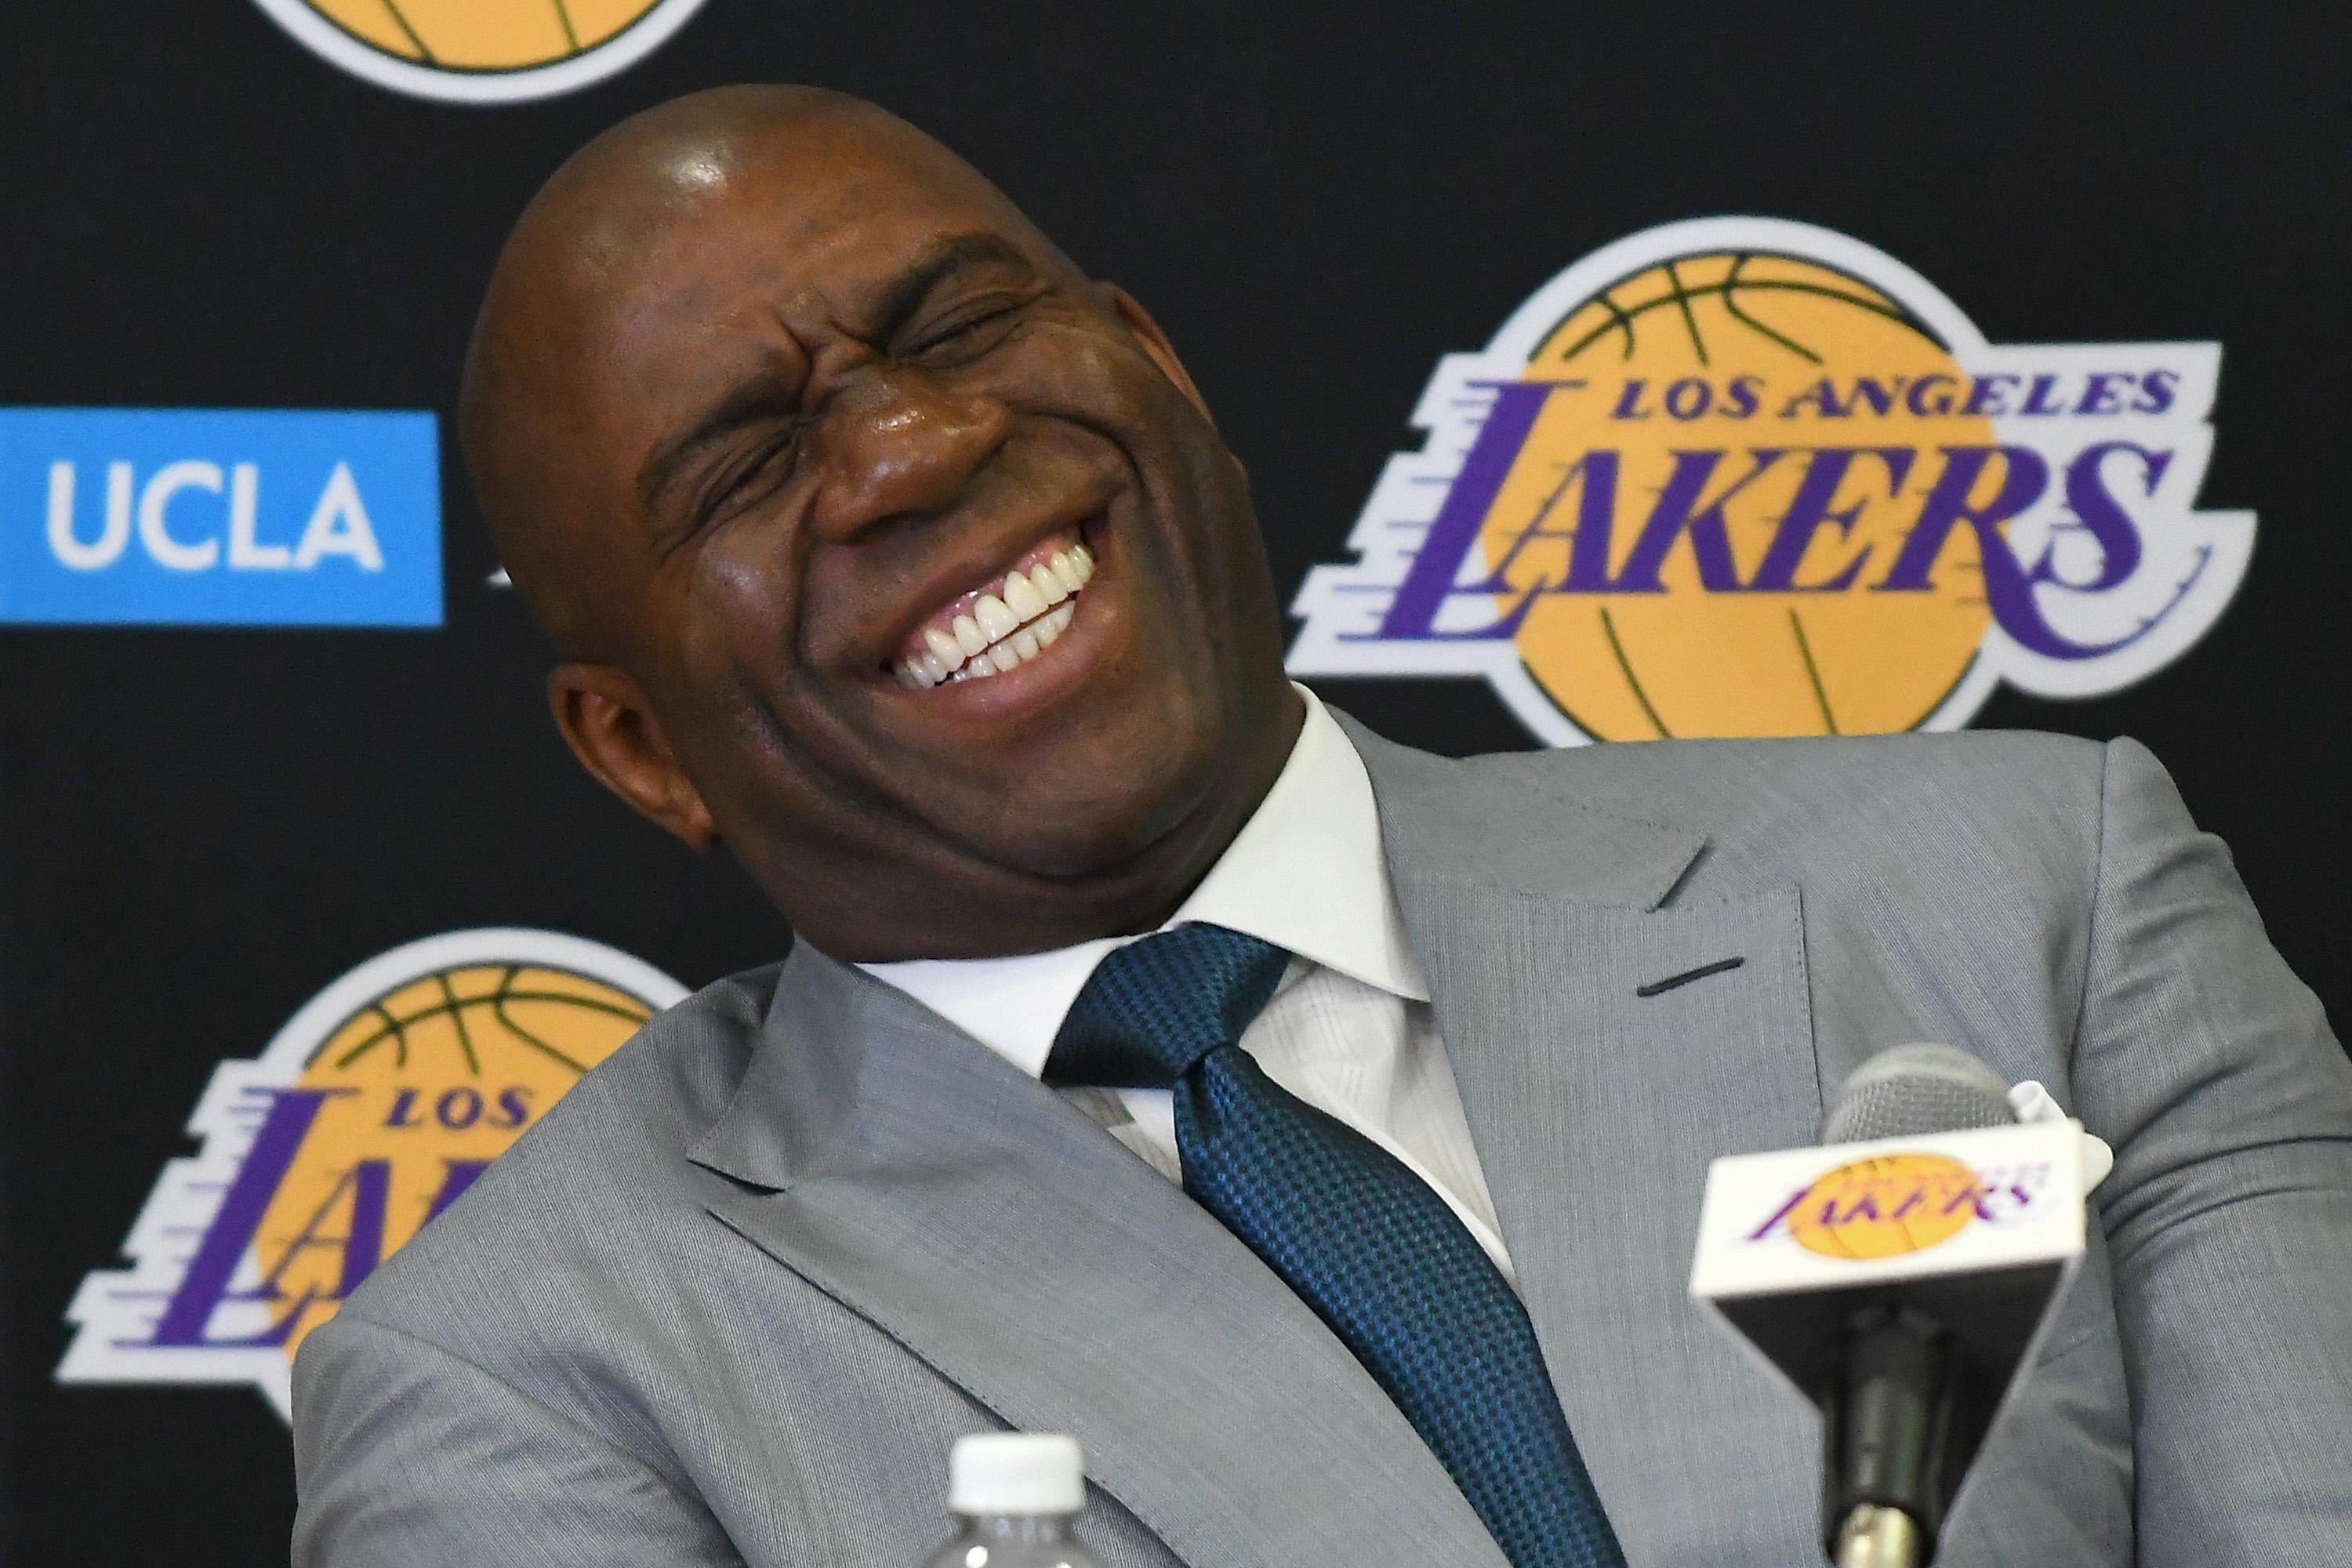 LOS ANGELES, CA - JUNE 23:  Magic Johnson, president of basketball operations of the Los Angeles Lakers shares a laugh with the media during a press conference on June 23, 2017 at the team training faculity in Los Angeles, California.  (Photo by Jayne Kamin-Oncea/Getty Images)